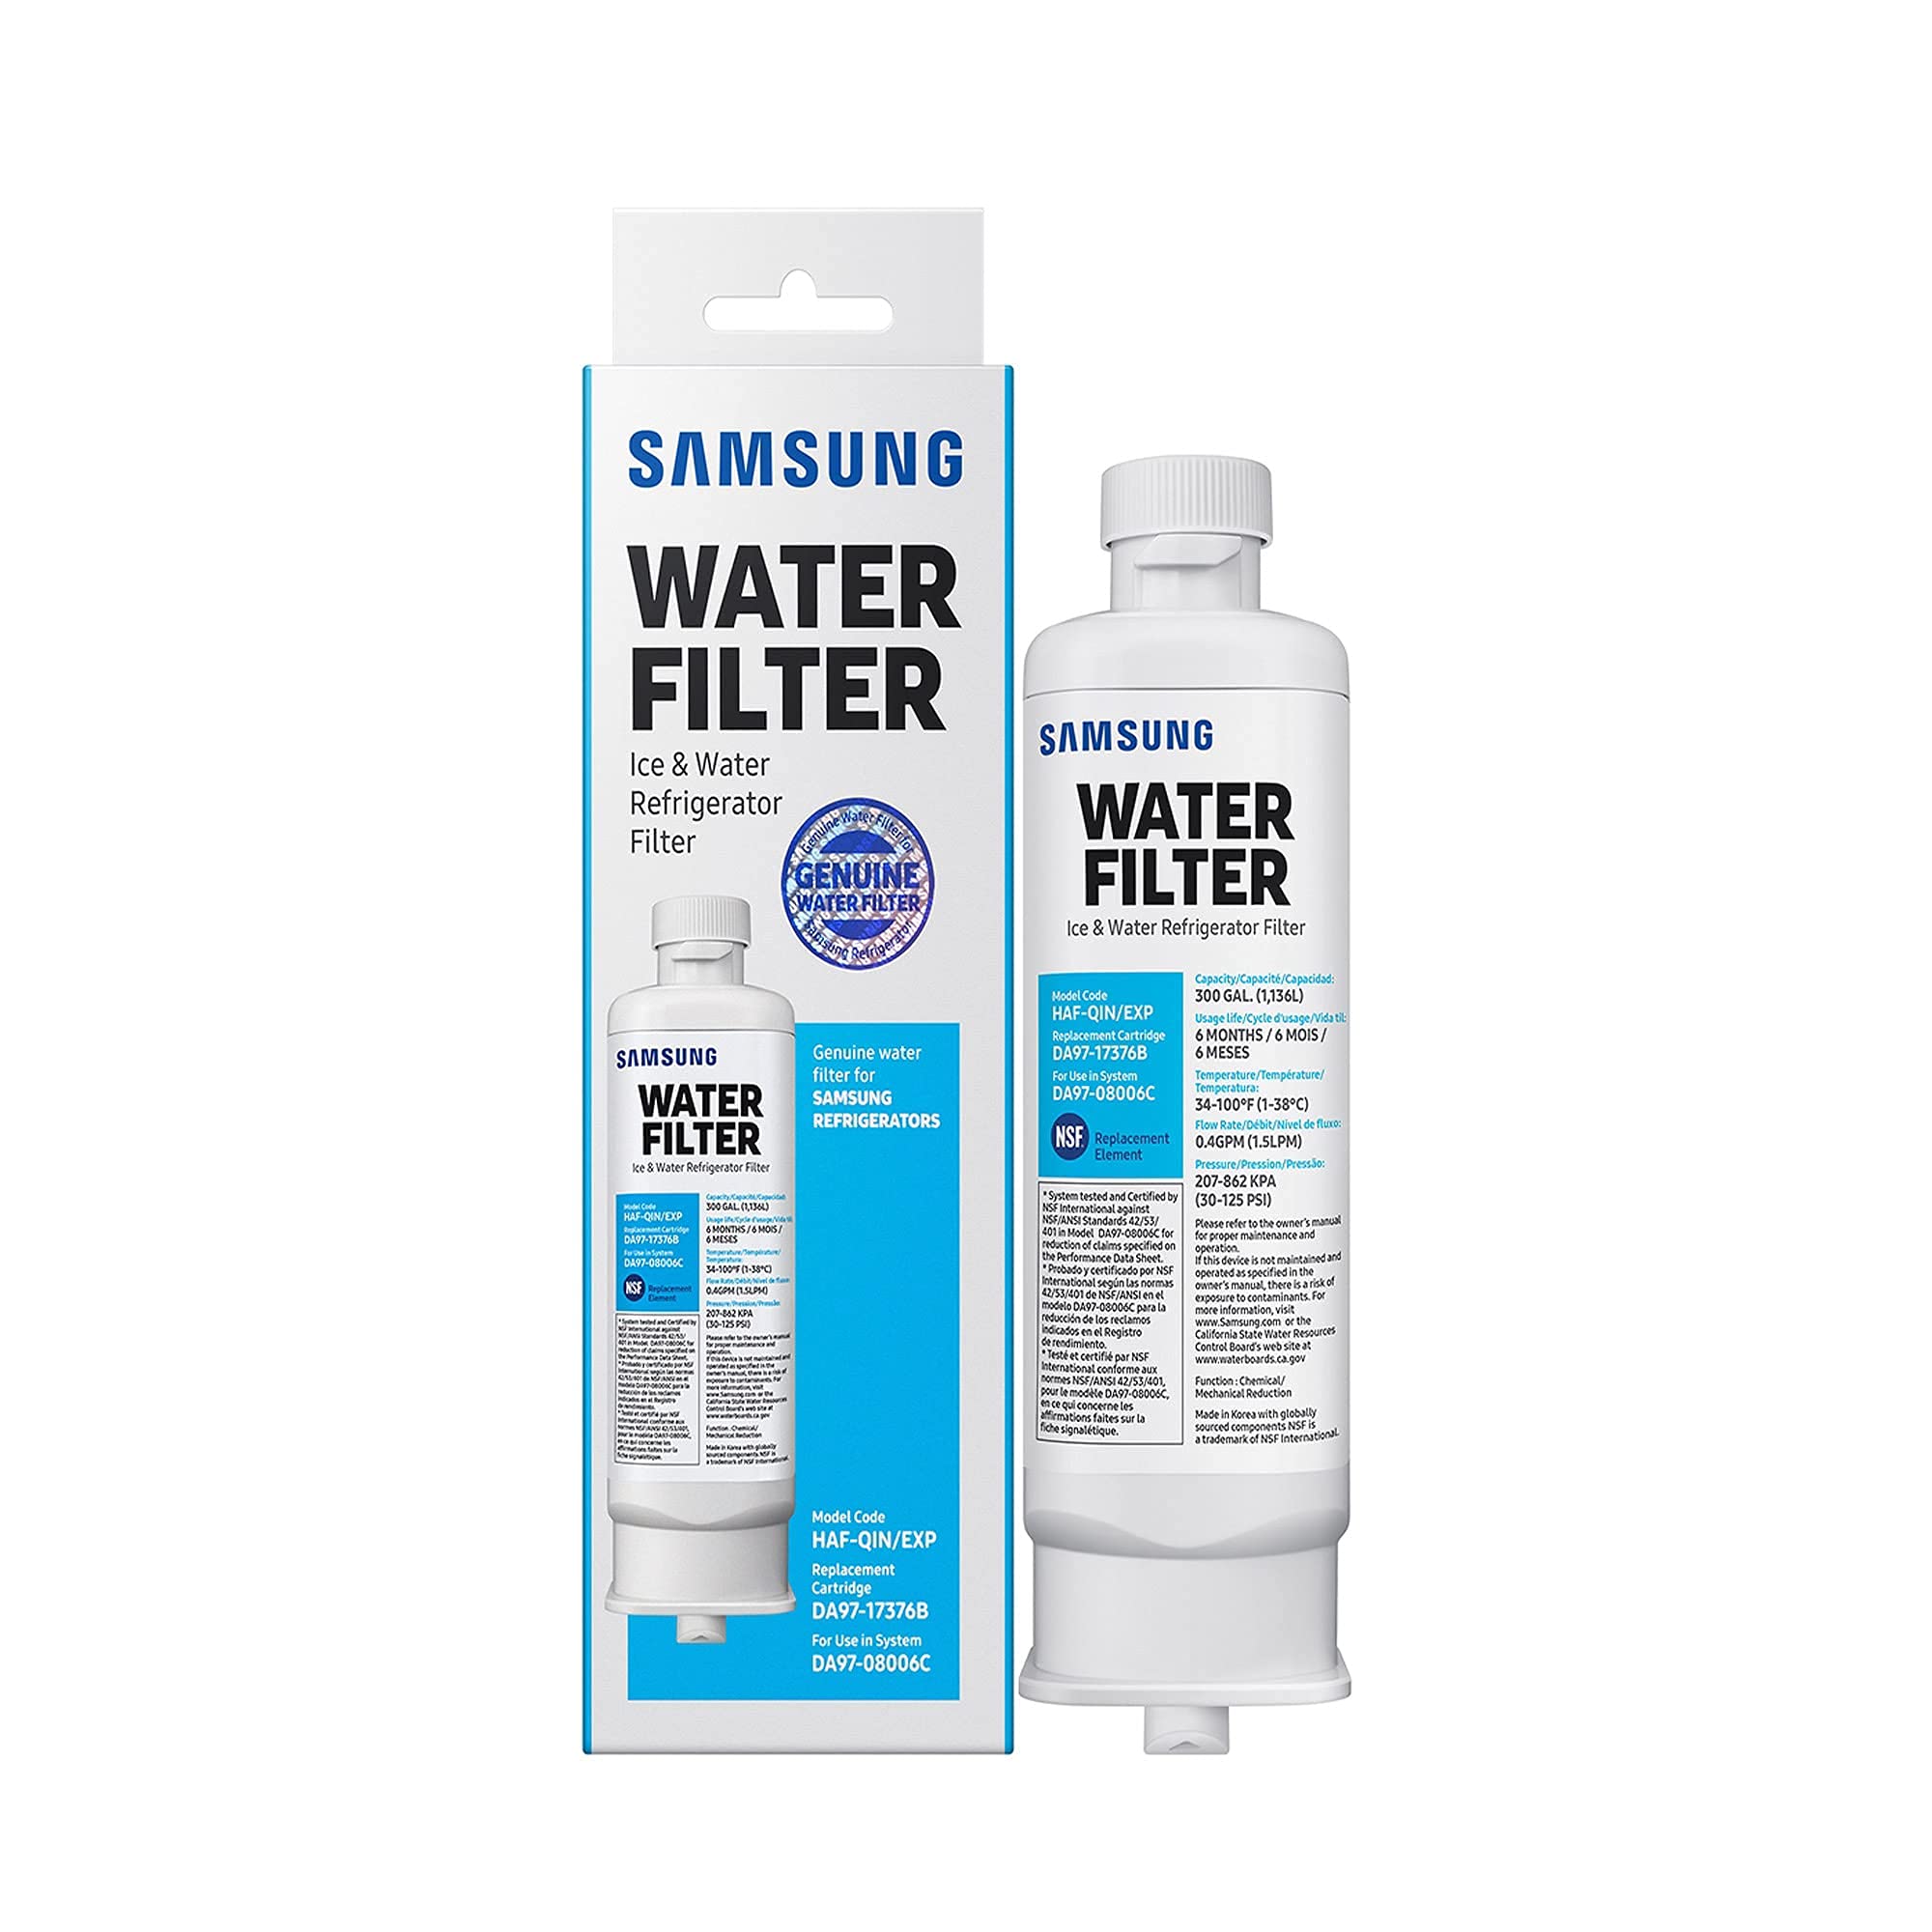 Samsung Genuine Filter for Refrigerator Water and Ice, Carbon Block Filtration for Clean, Clear Drinking Water